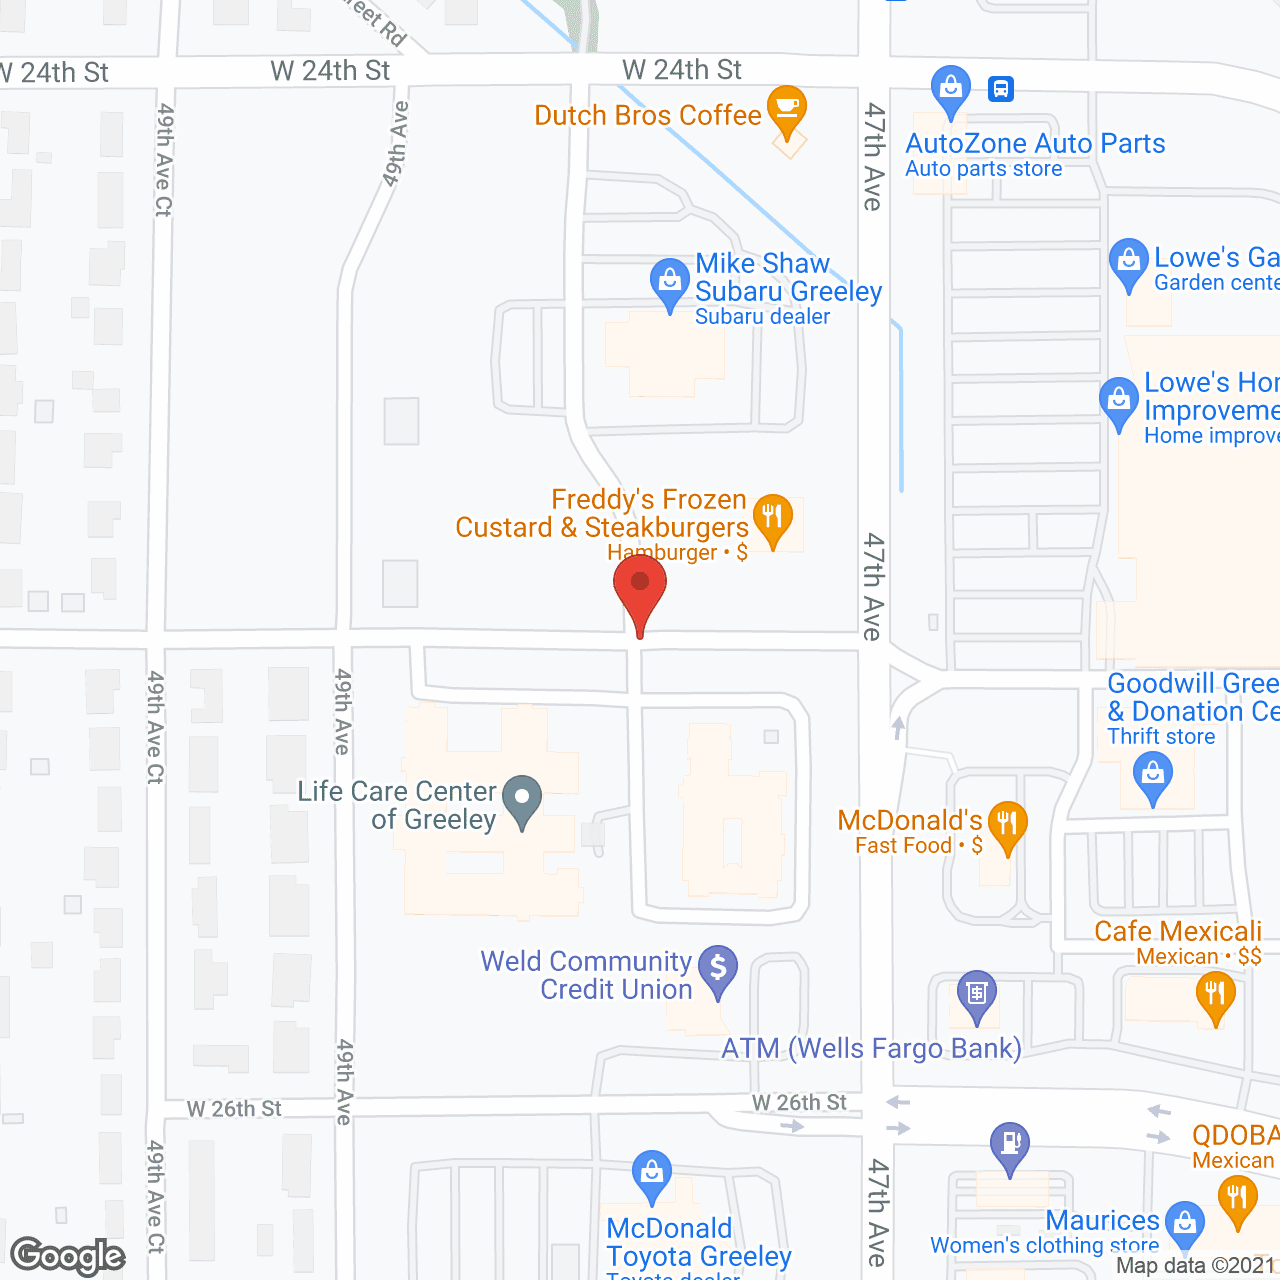 Life Care Ctr of Greeley in google map